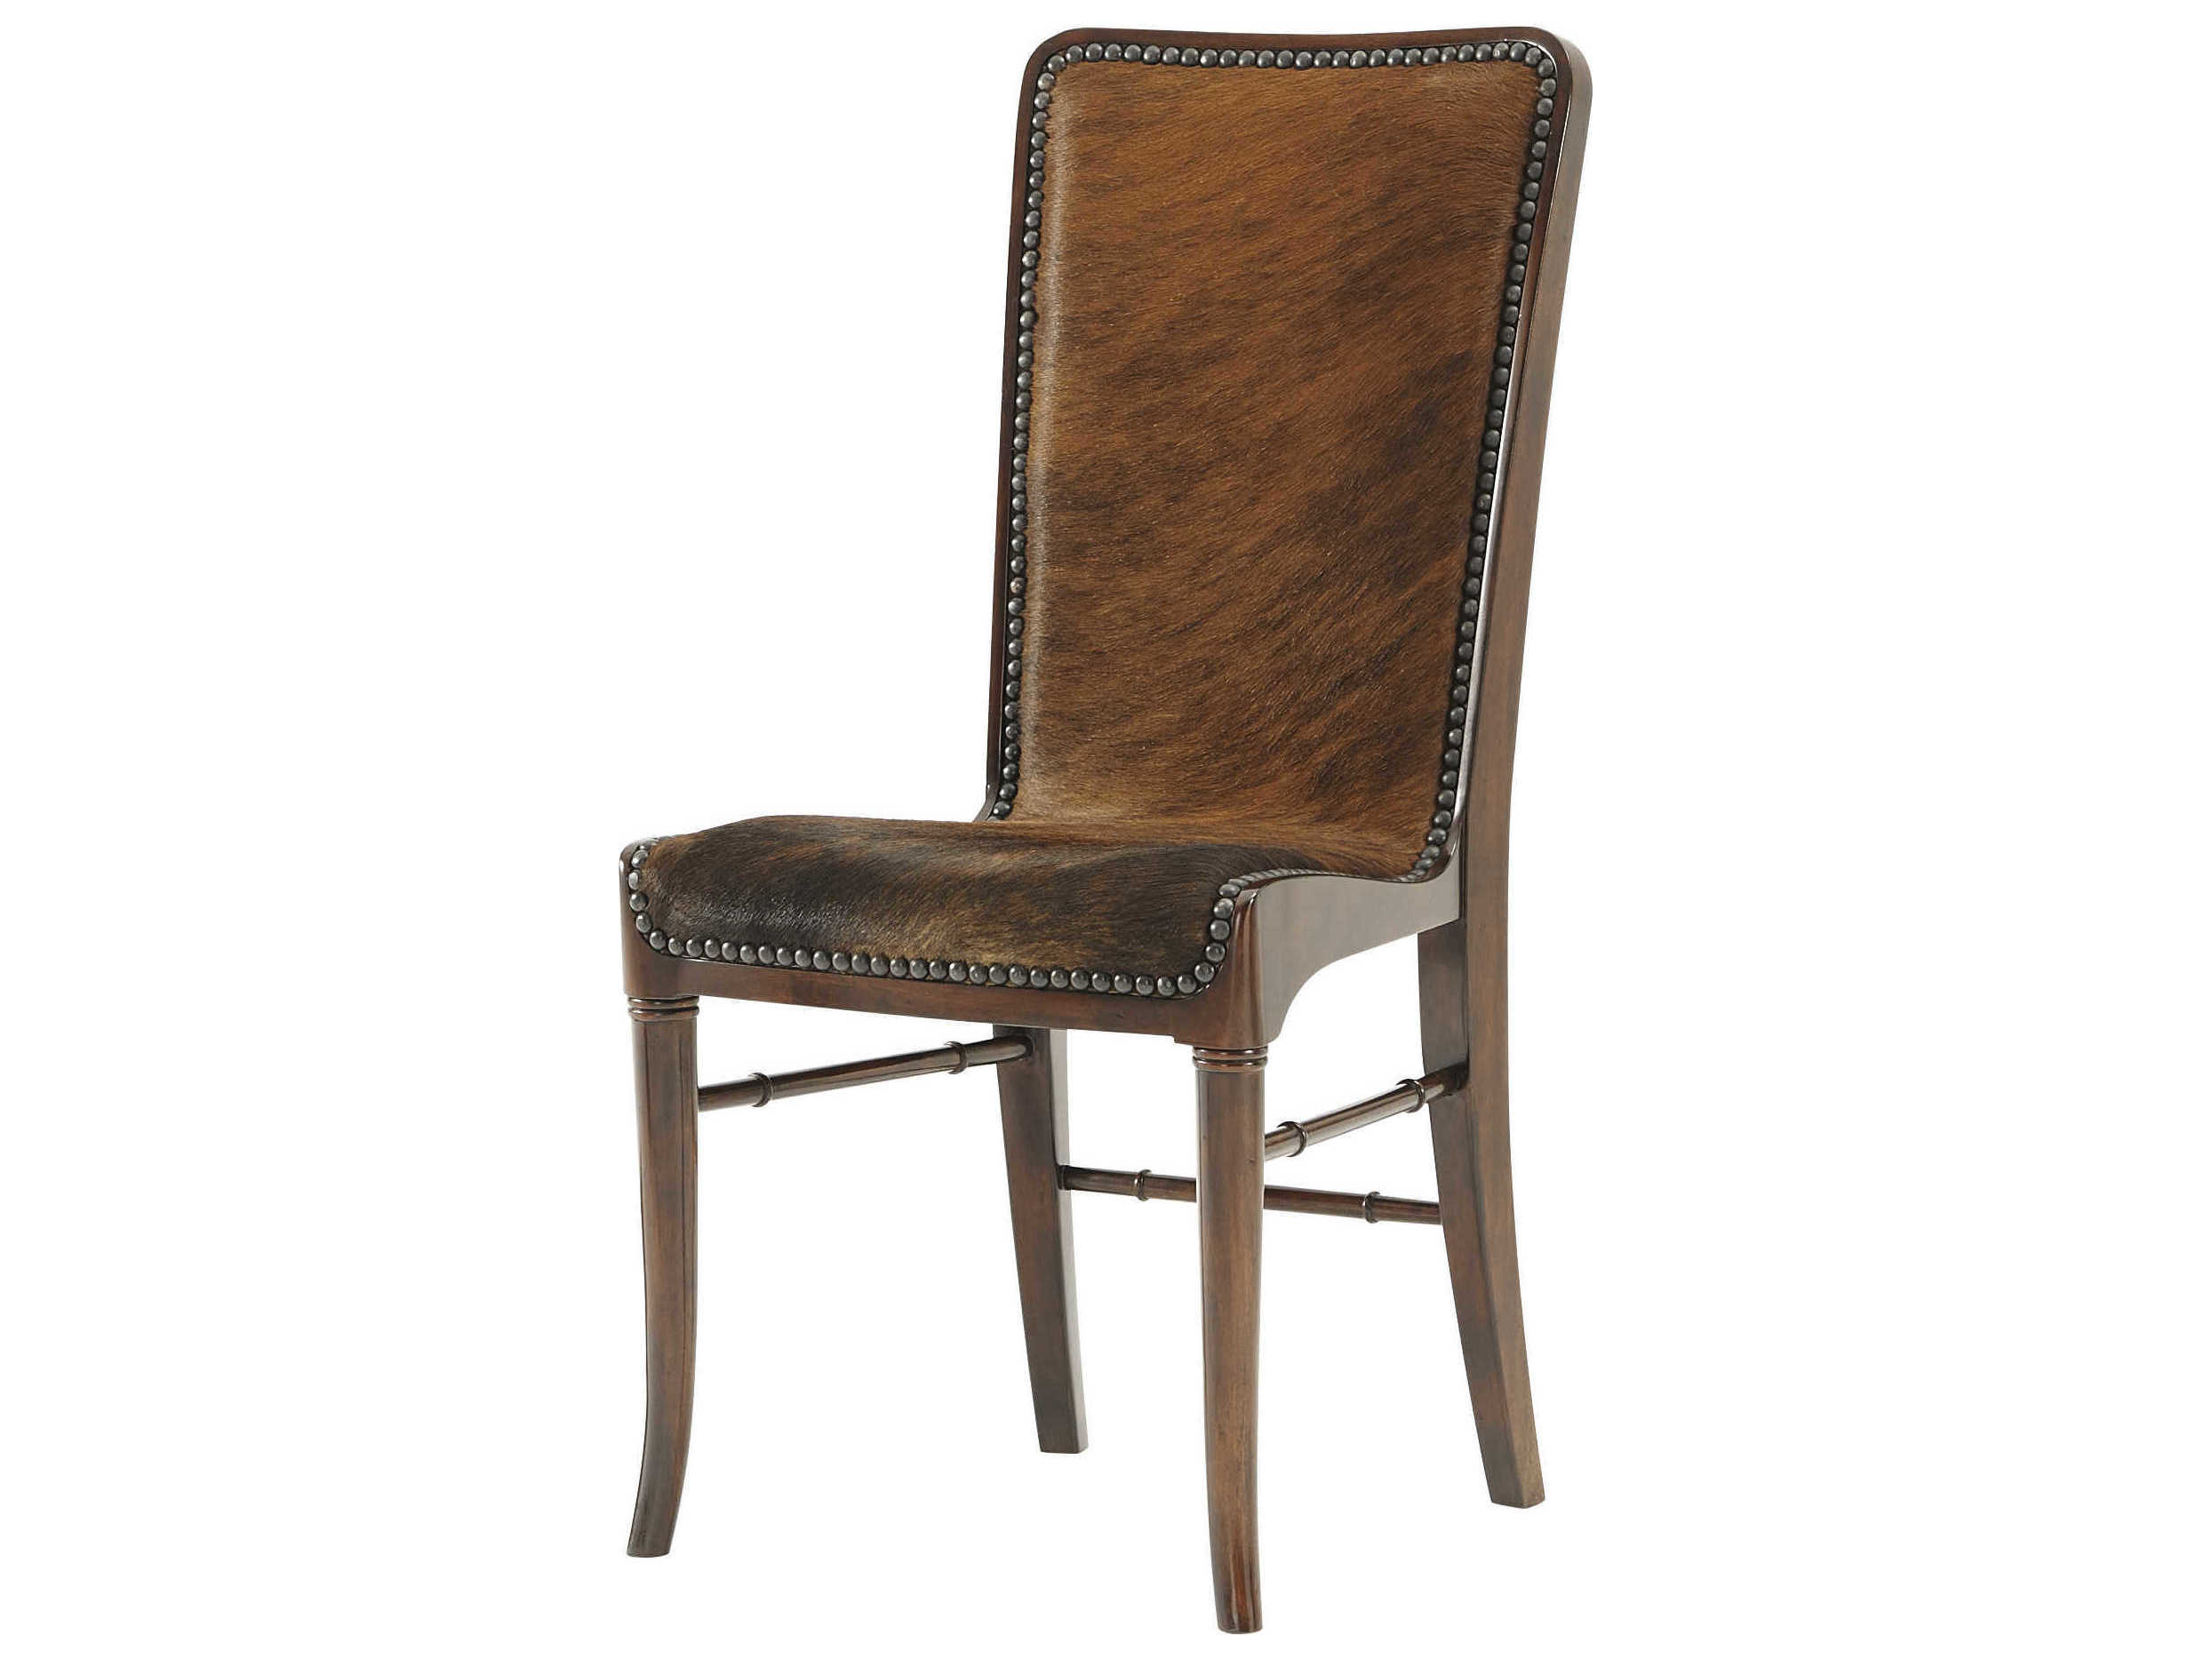 Theodore Alexander Mahogany / Hair on Hide Side Dining Chair | TAL4000512HH